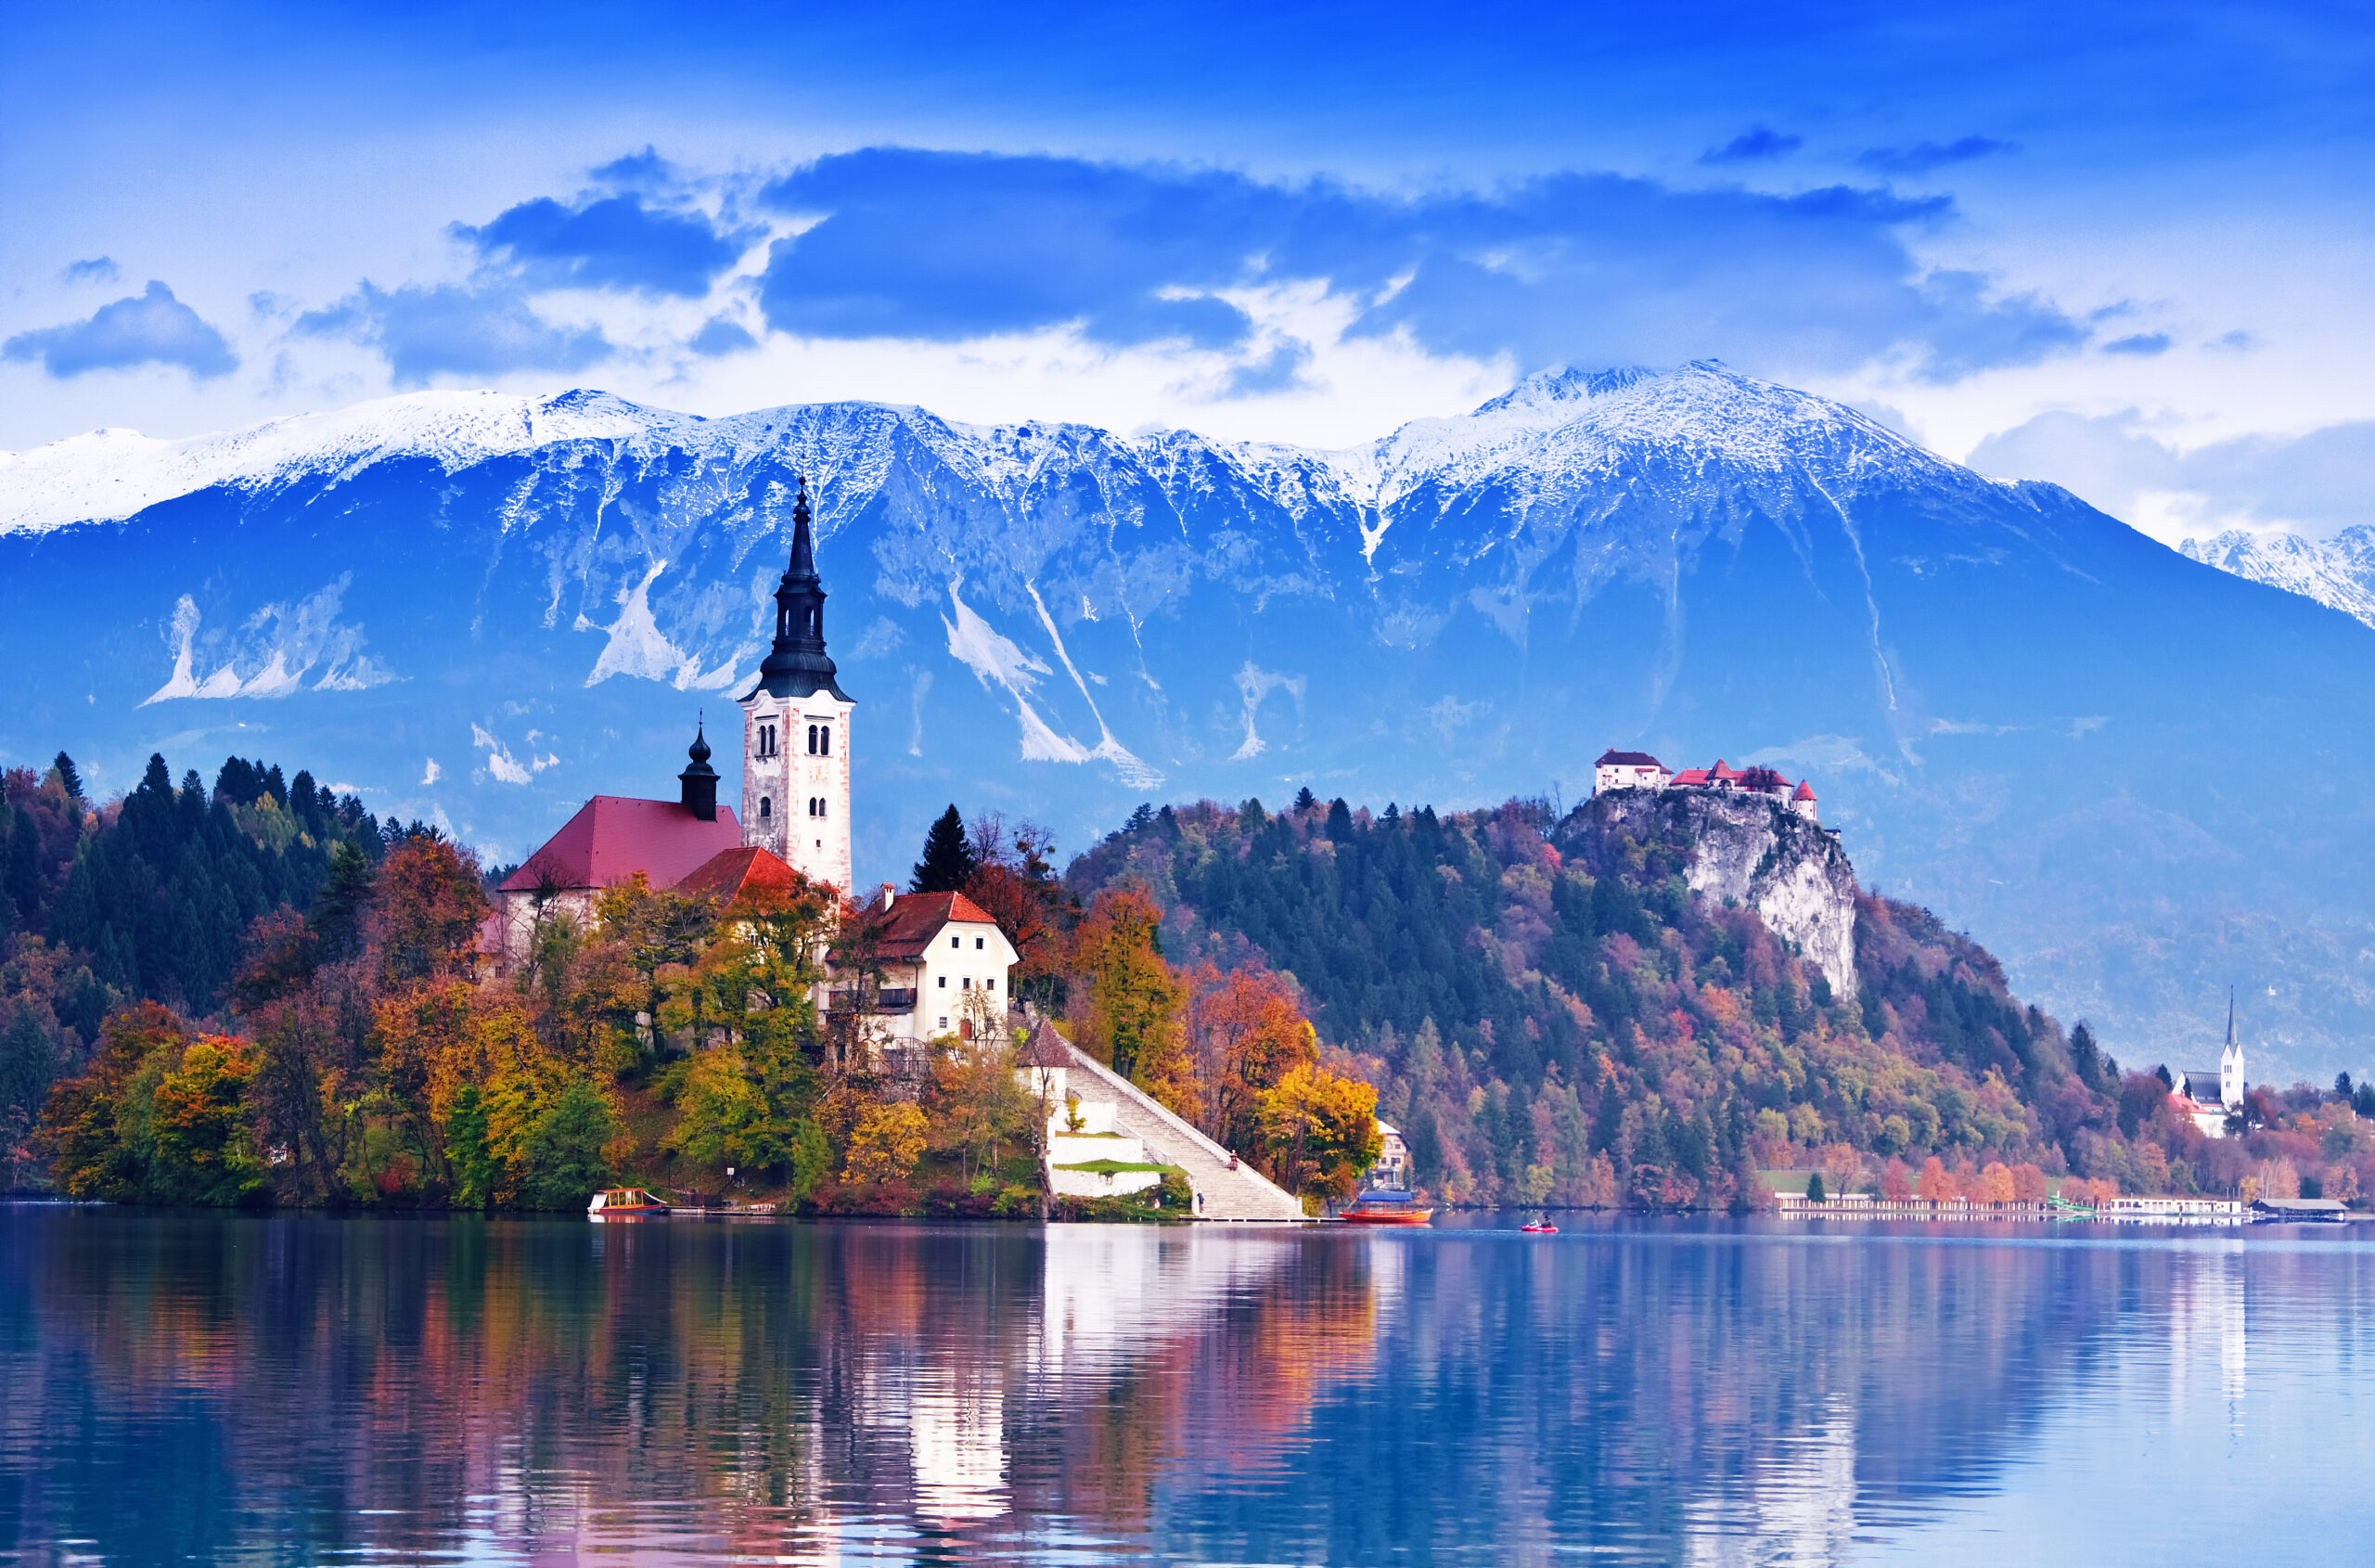 <p>Slovenia is highly rated as one of the safest countries in the entire world. This makes it a great first female solo trip location. There are so many things to love here: the excellent food and countless sights to see, and it’s also easy on your wallet.</p>